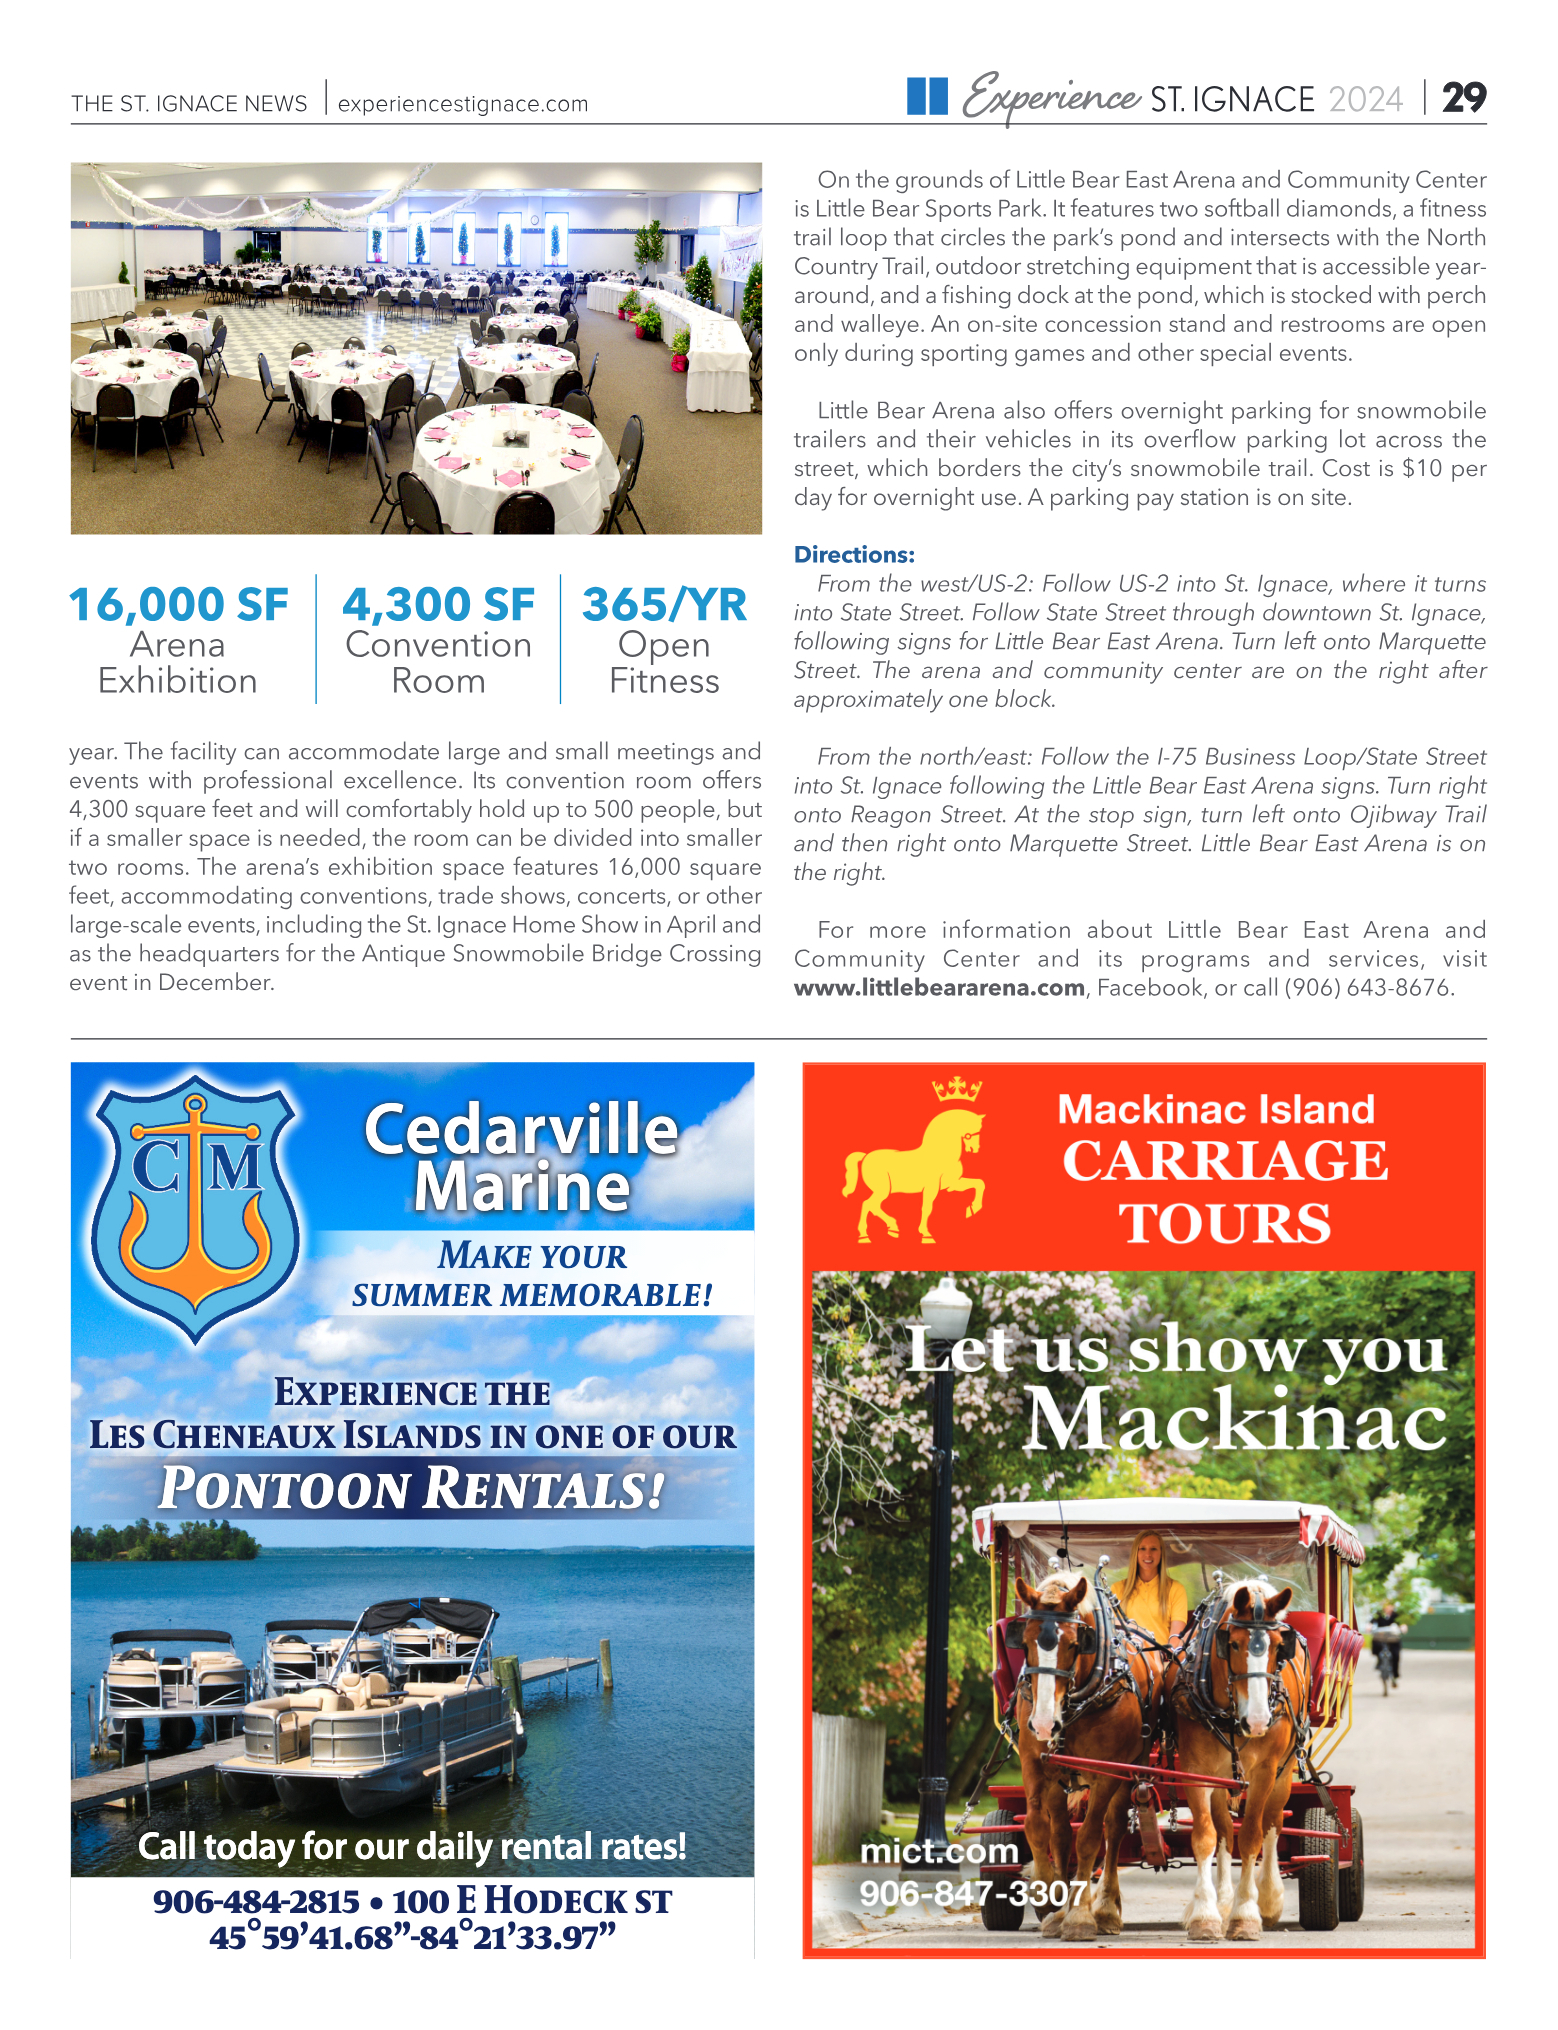 Experience St. Ignace - Guest Travel Guide 2024 - page 29